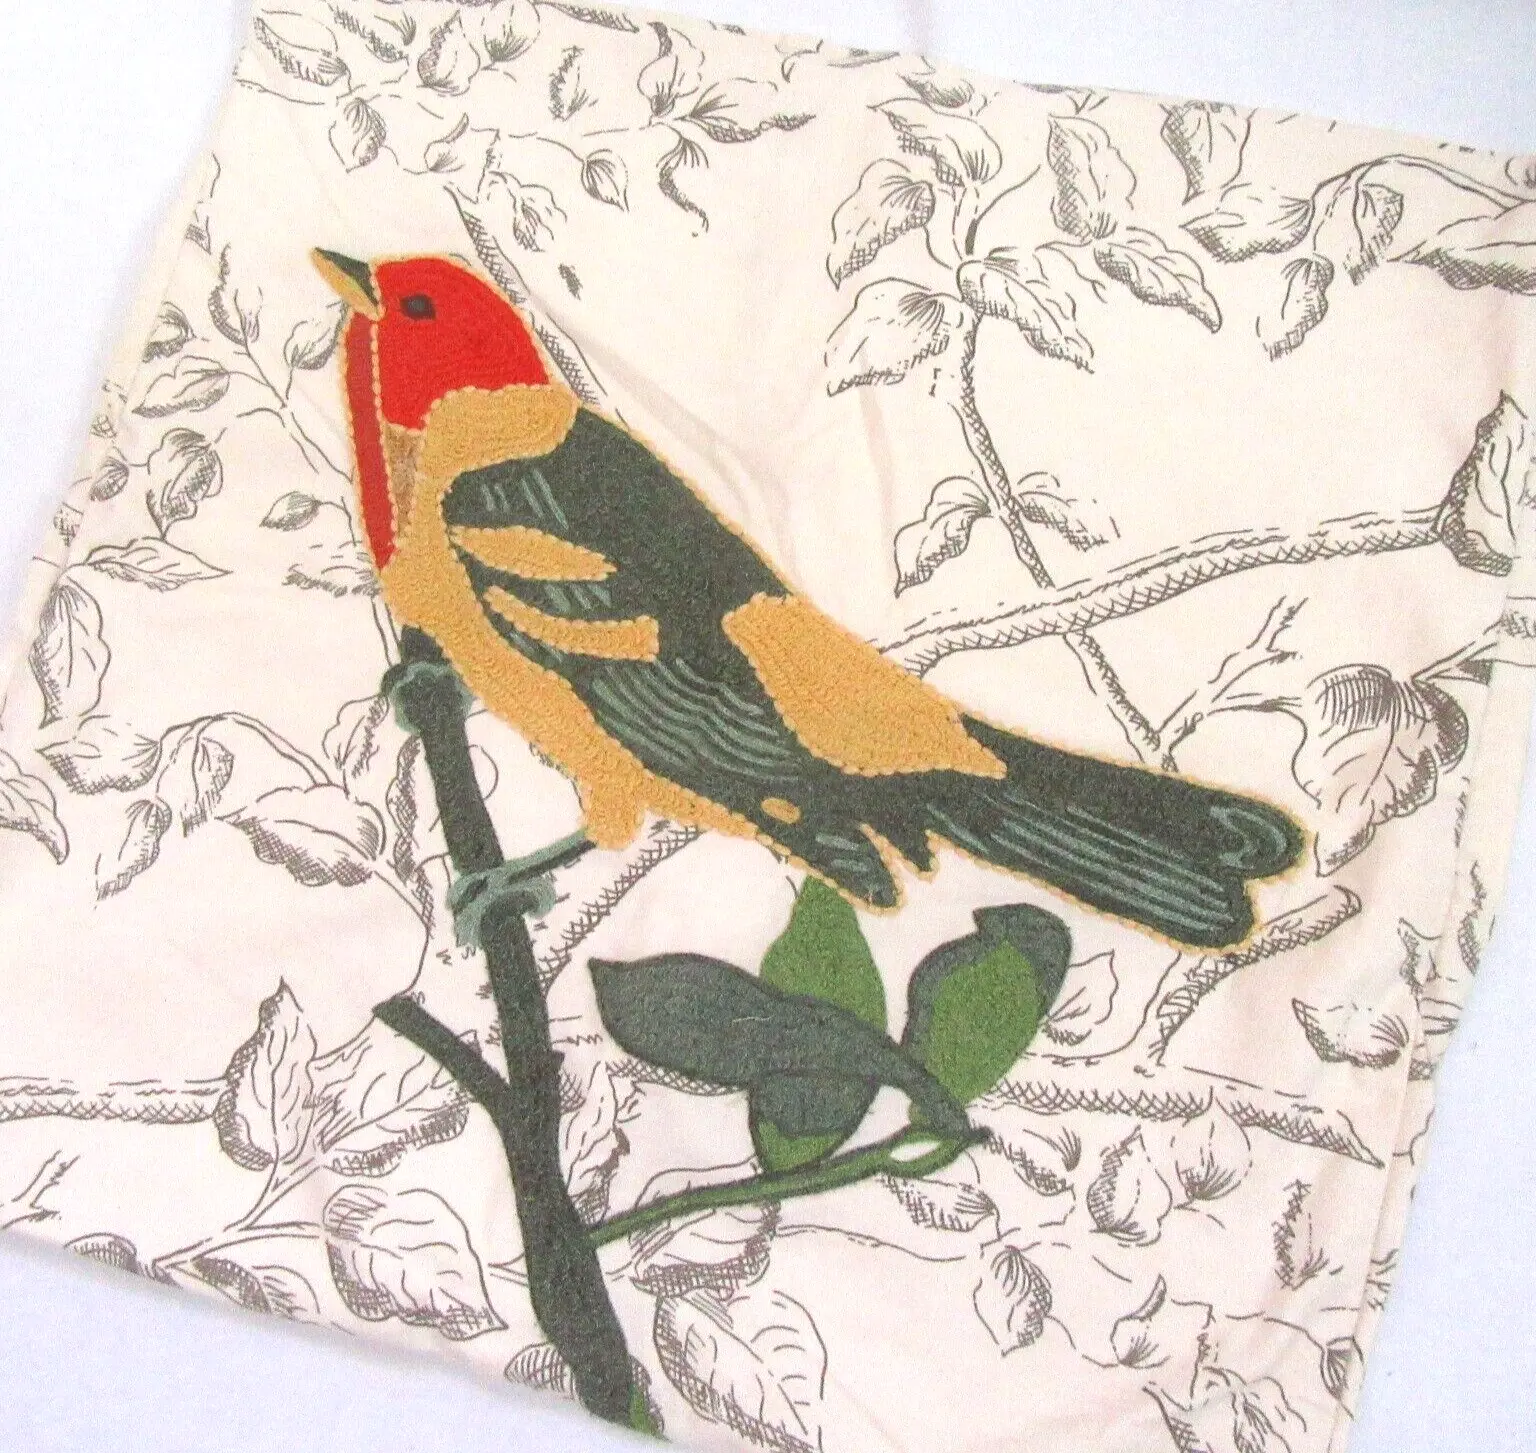 Pottery Barn Bird Branch Crewel Embroidery 18-inch Square Pillow Cover - $36.00